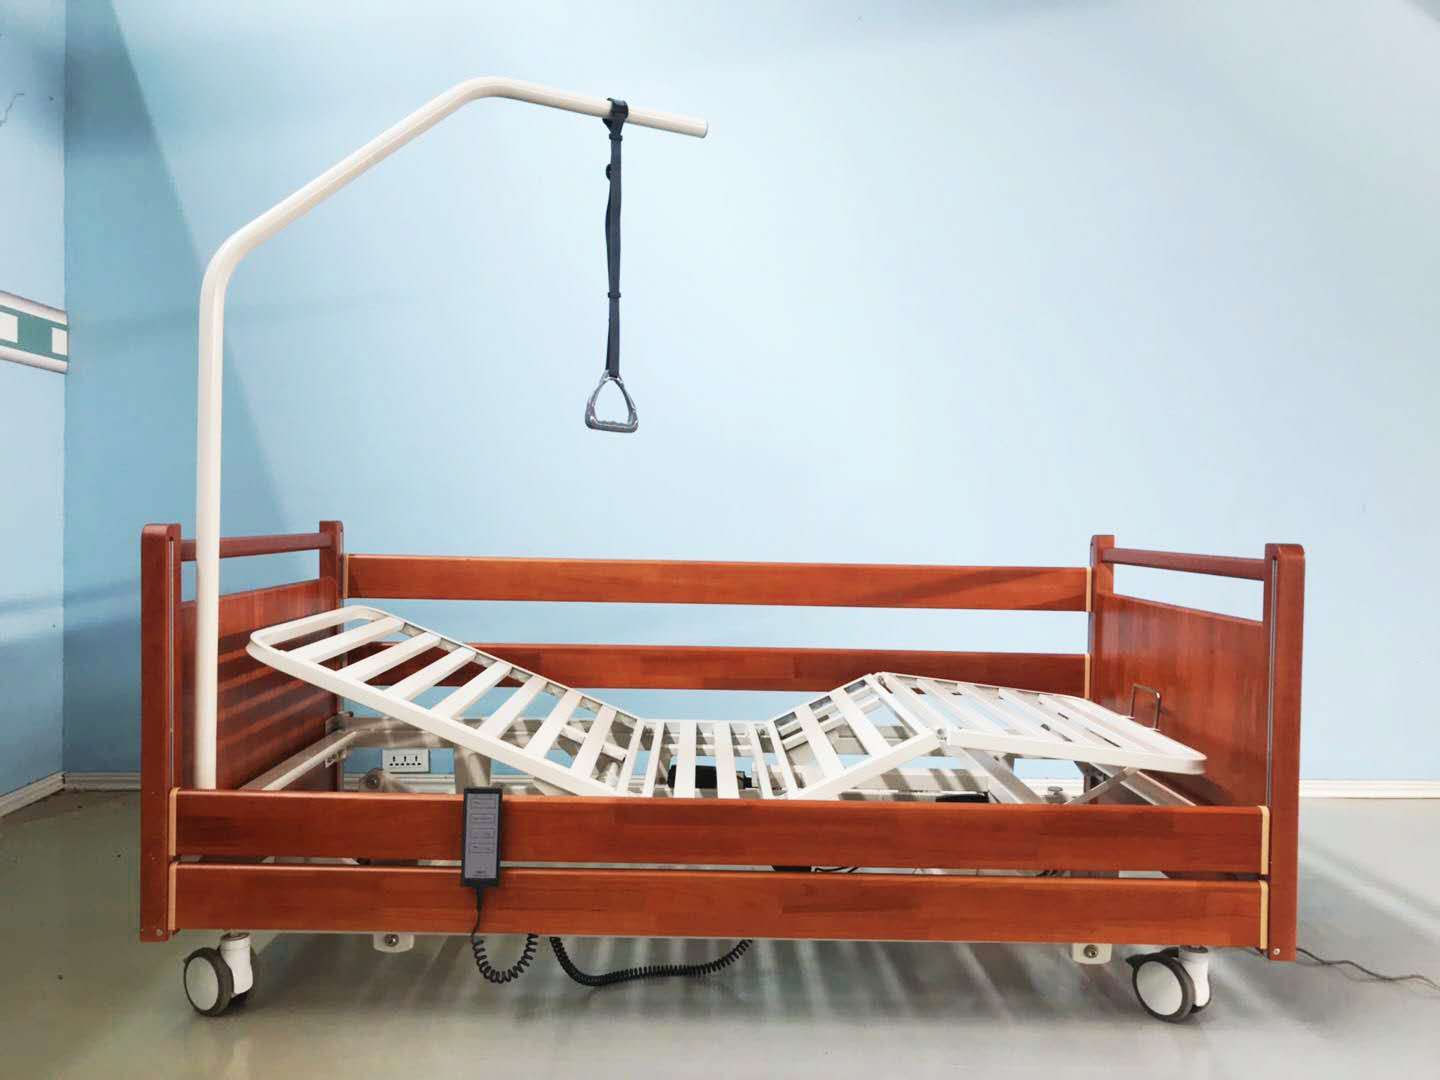 Best Hospital Bed for Home Care -